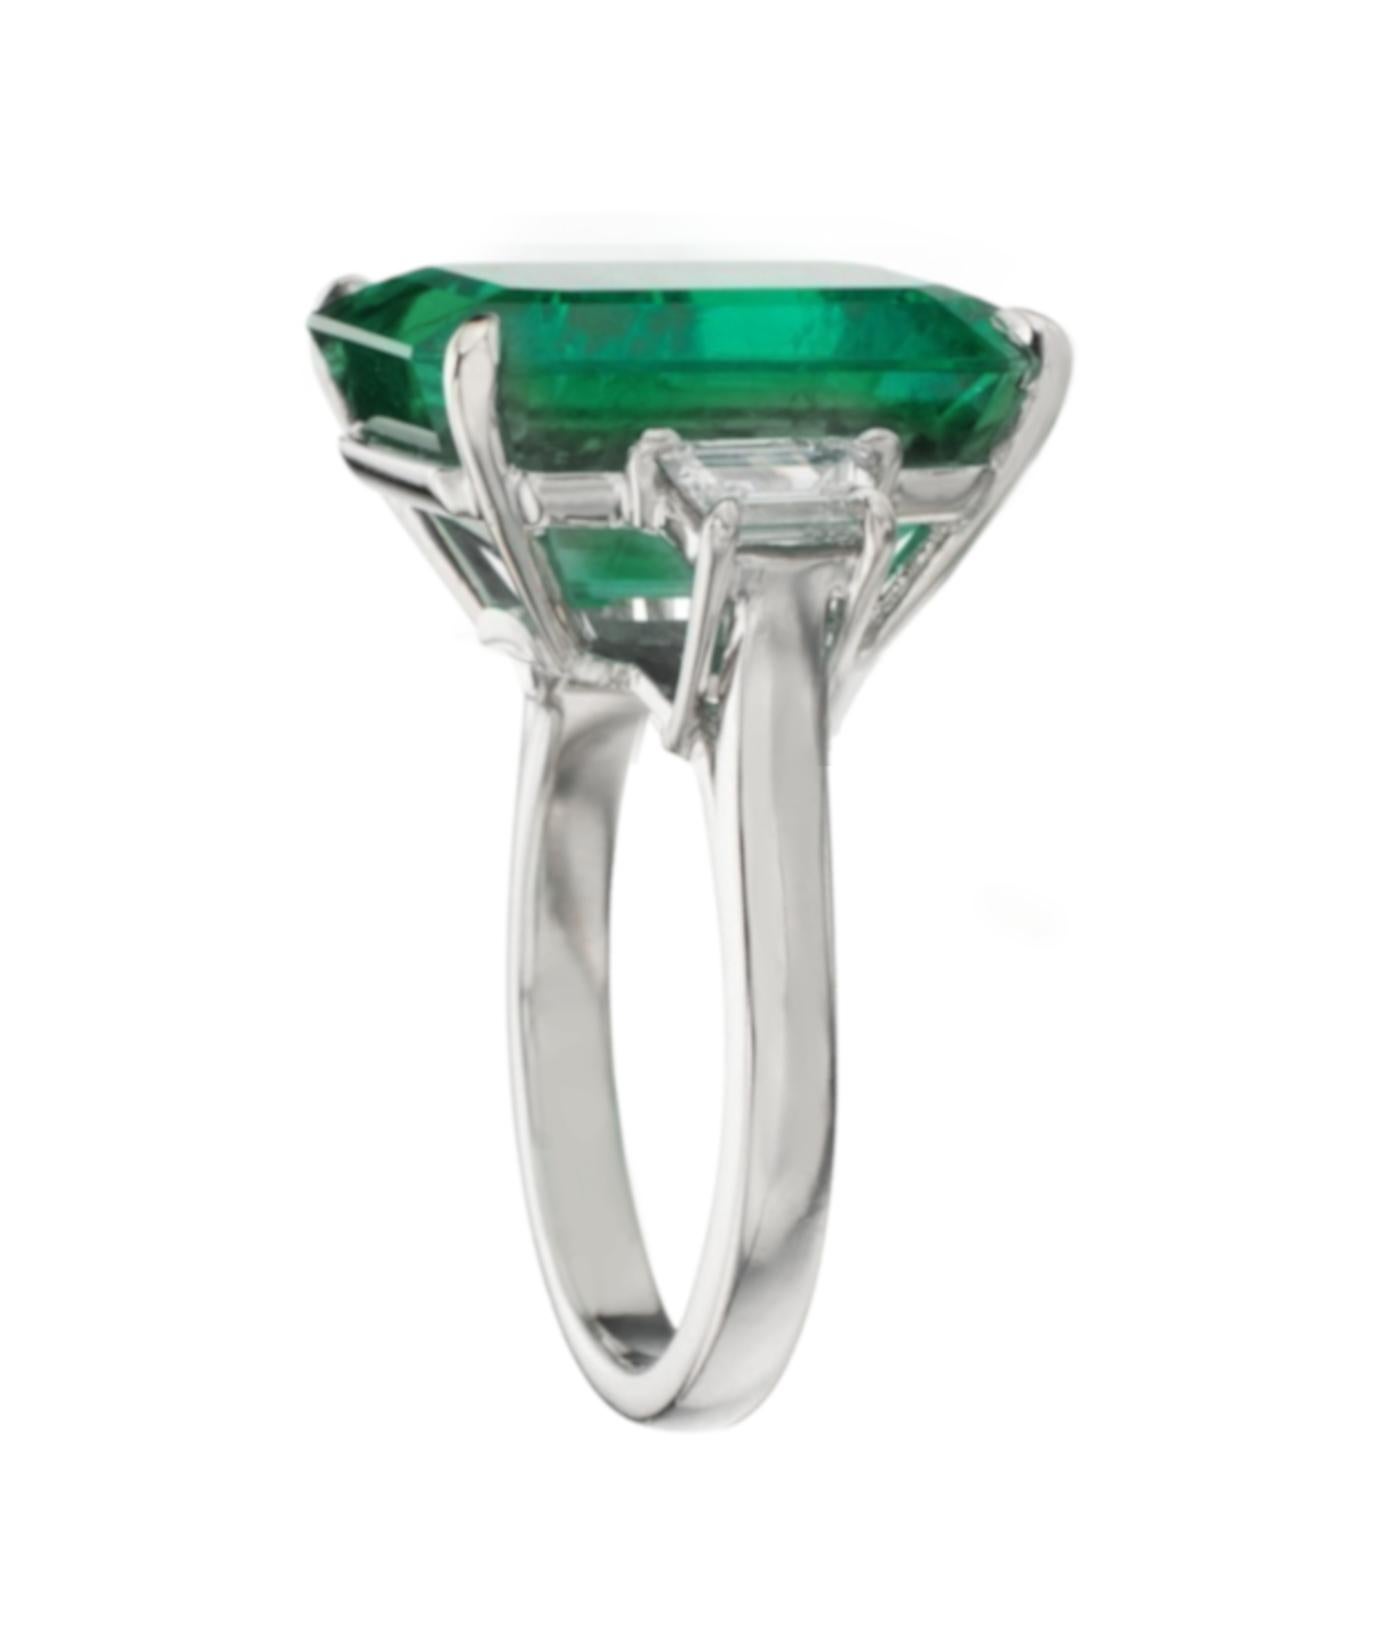 Indulge in the allure of nature's mesmerizing beauty with this distinguished GRS Certified 5.40 Carat Insignificant Green Emerald White Gold Ring.

Center Gemstone:
At the heart of this exceptional piece is a GRS Certified Insignificant Green